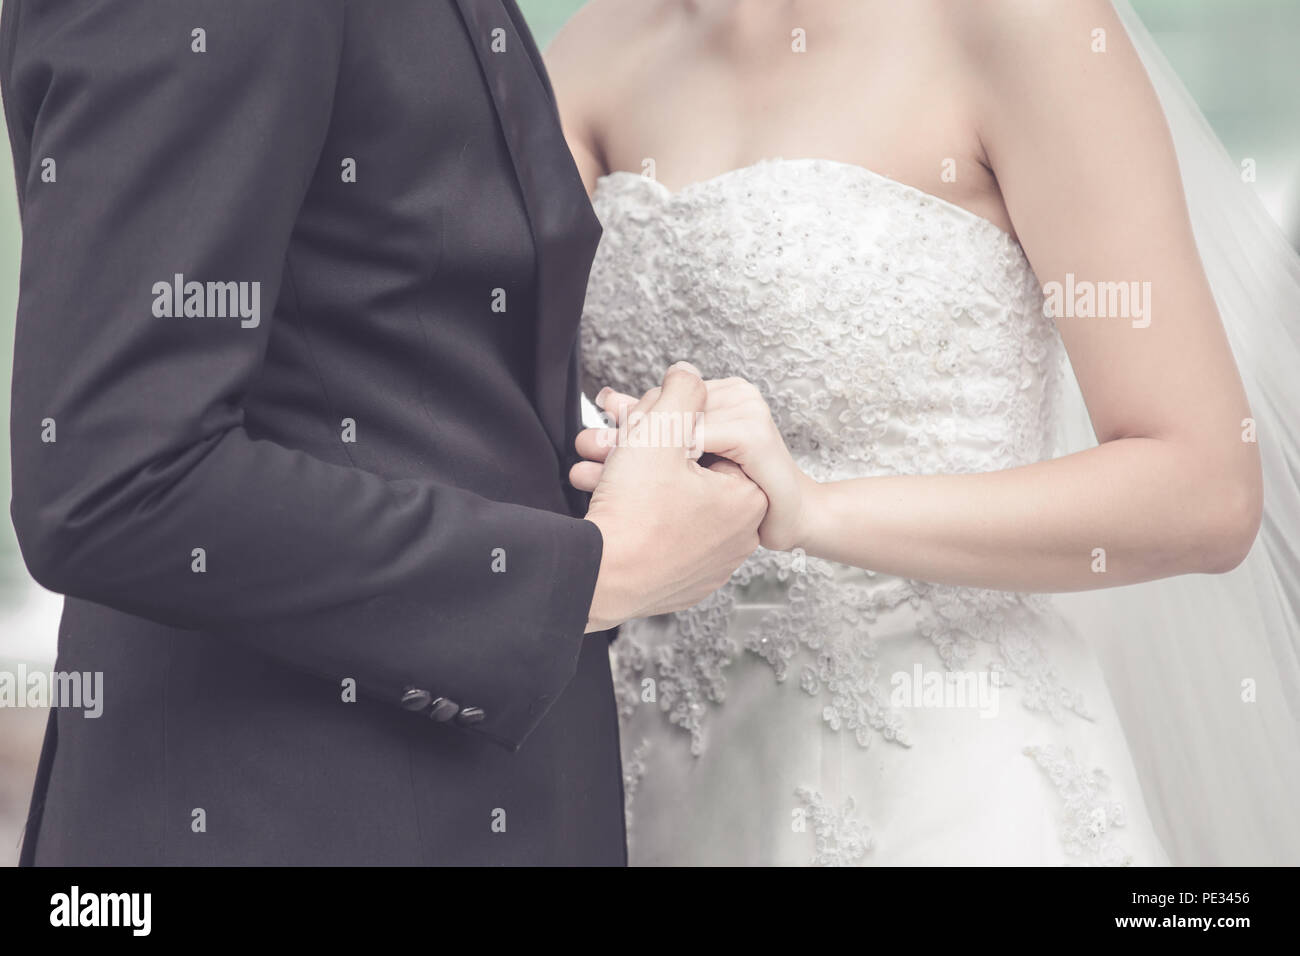 Married bride and groom holding hands as a symbol of love and happiness. Stock Photo